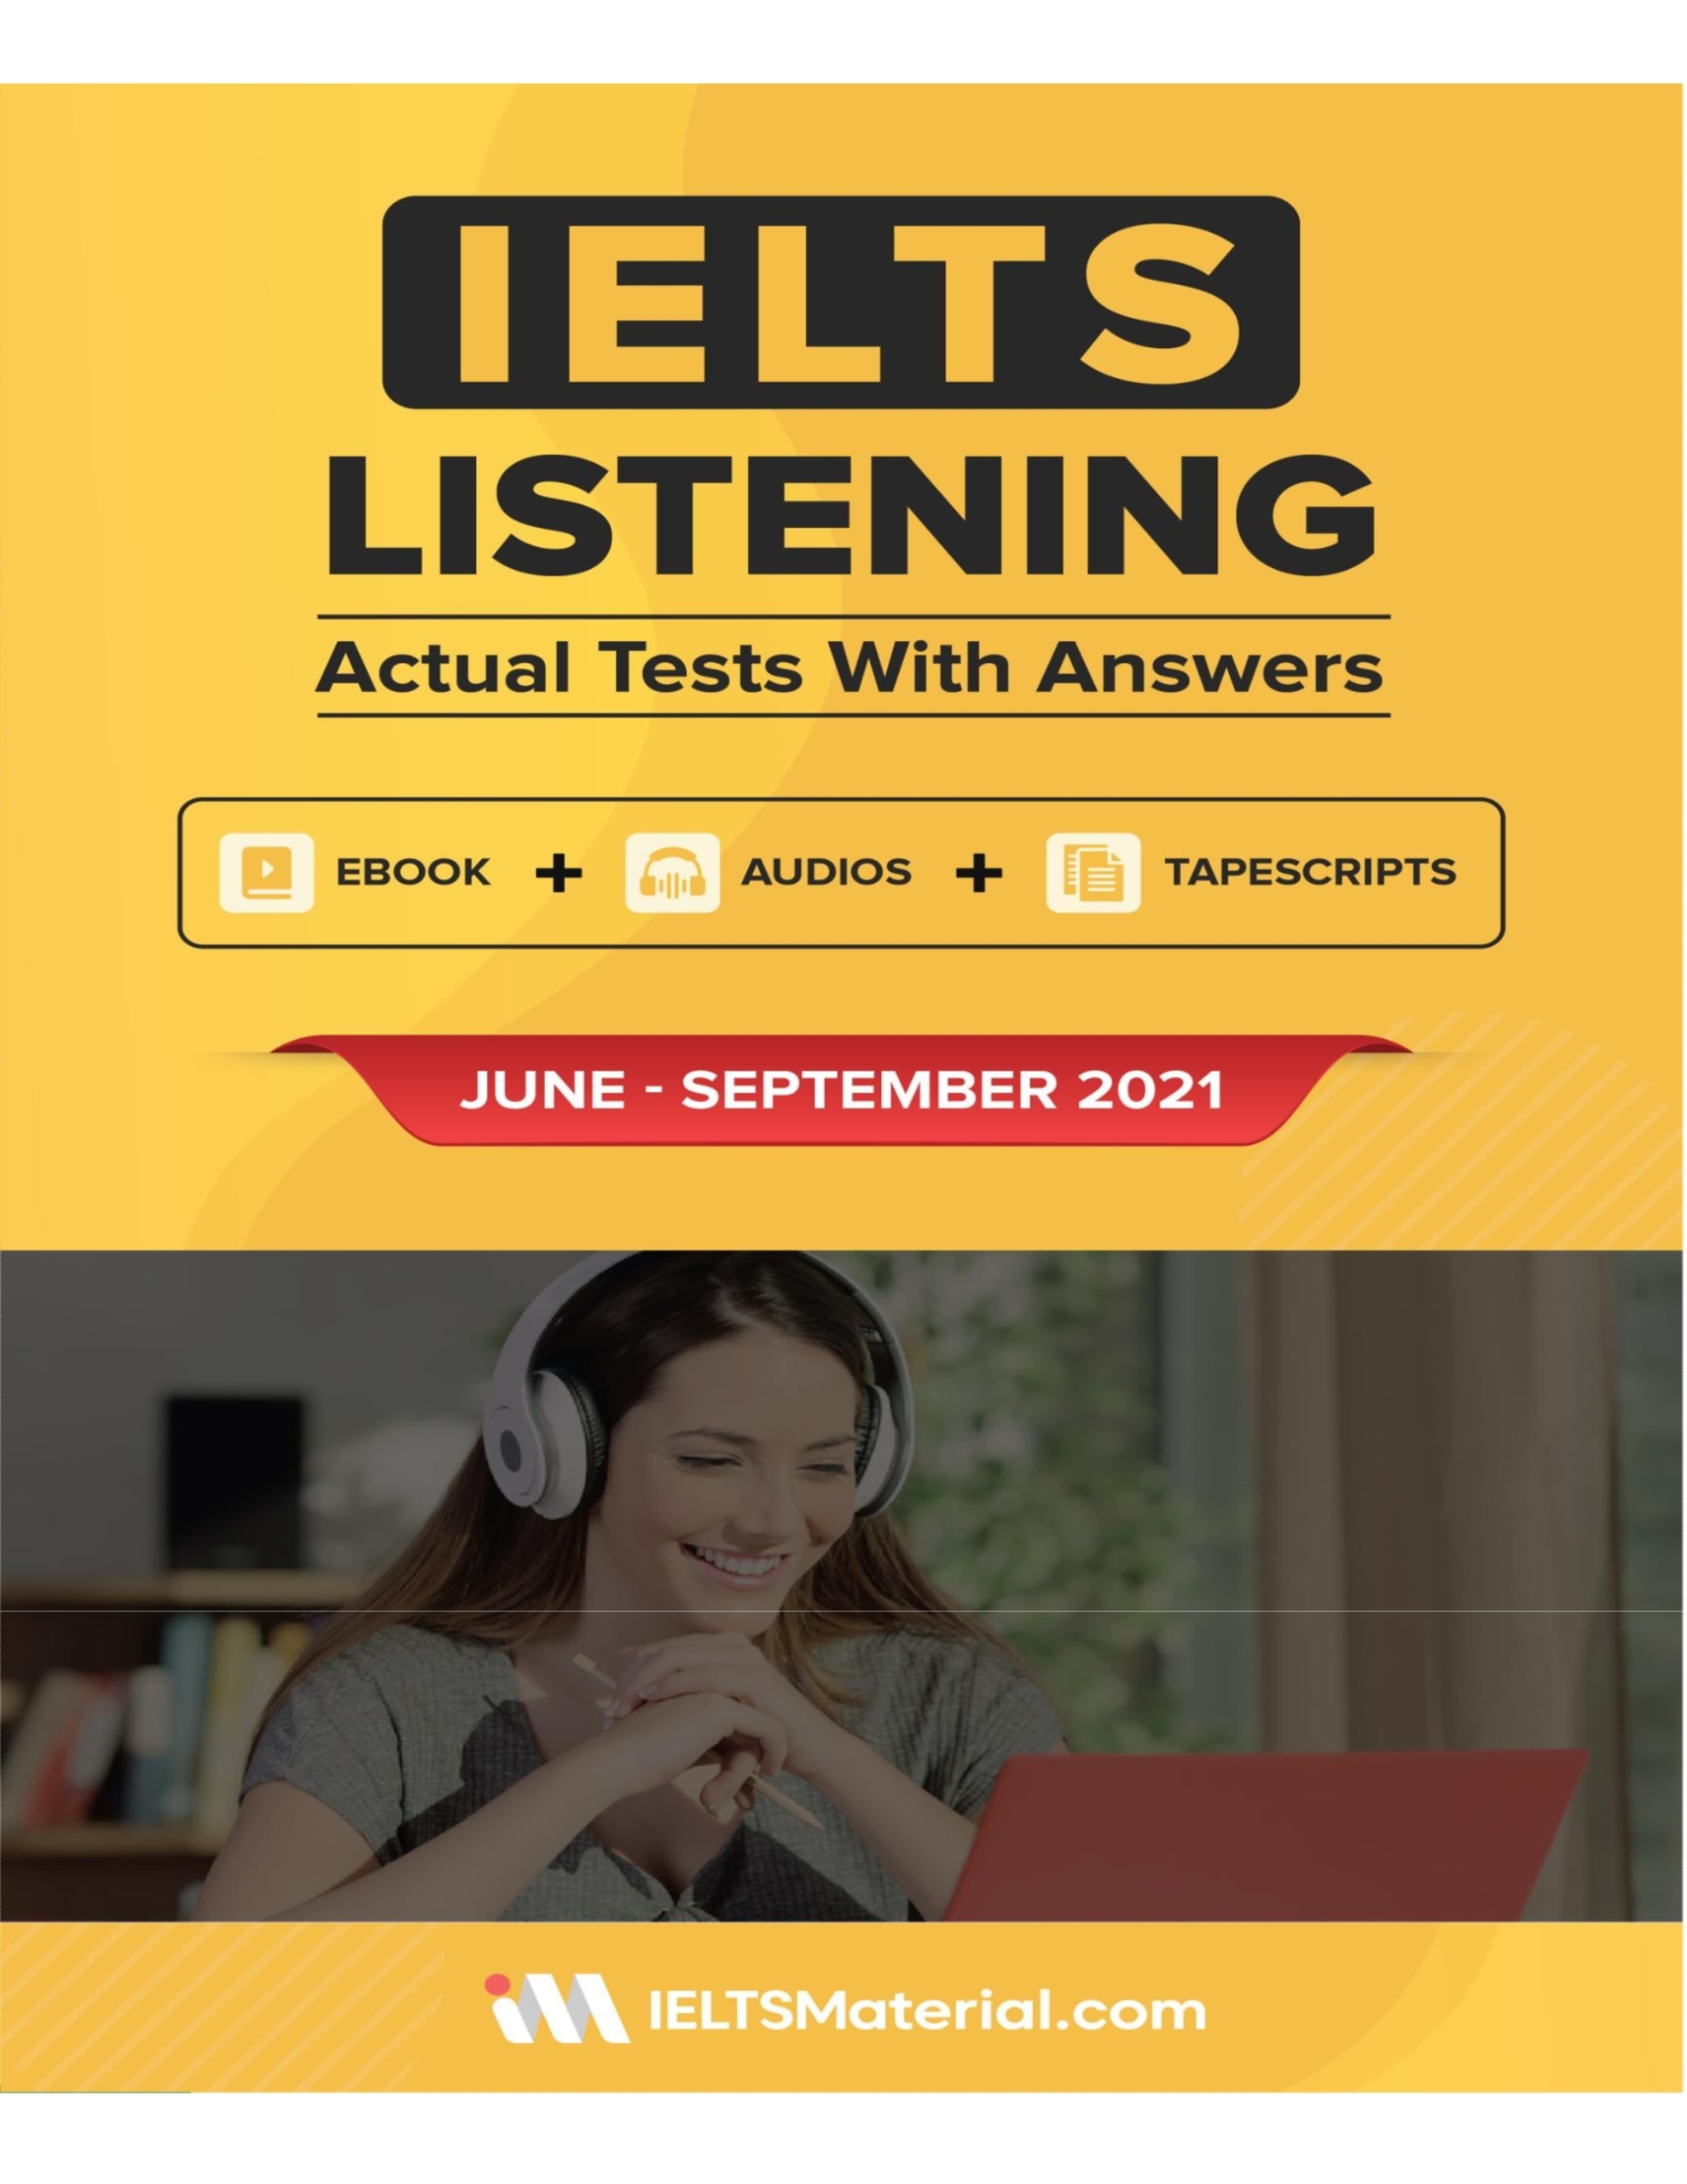 IELTS Listening Actual Tests with Answers June - September 2021